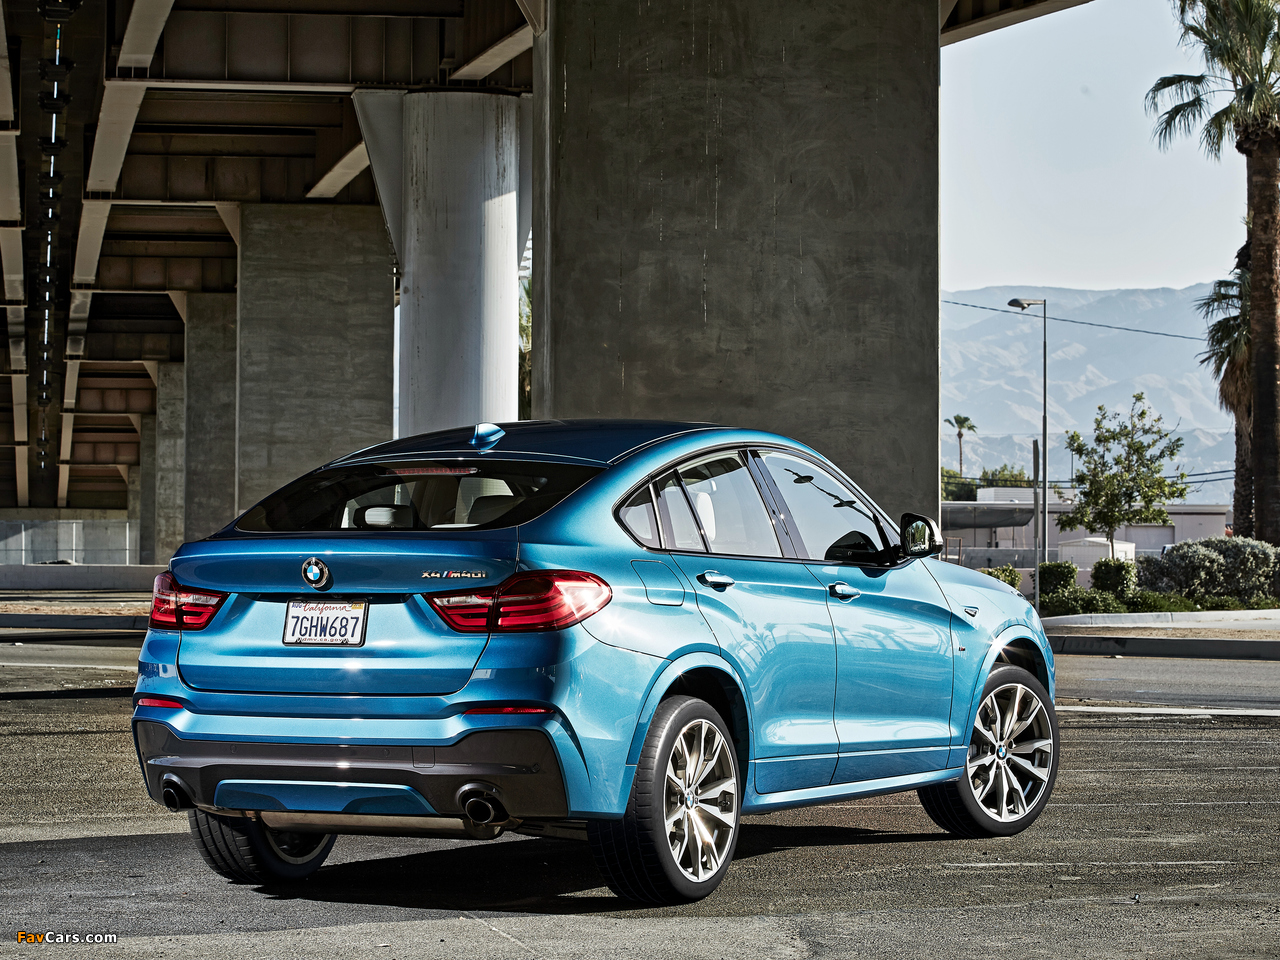 BMW X4 M40i (F26) 2015 pictures (1280 x 960)